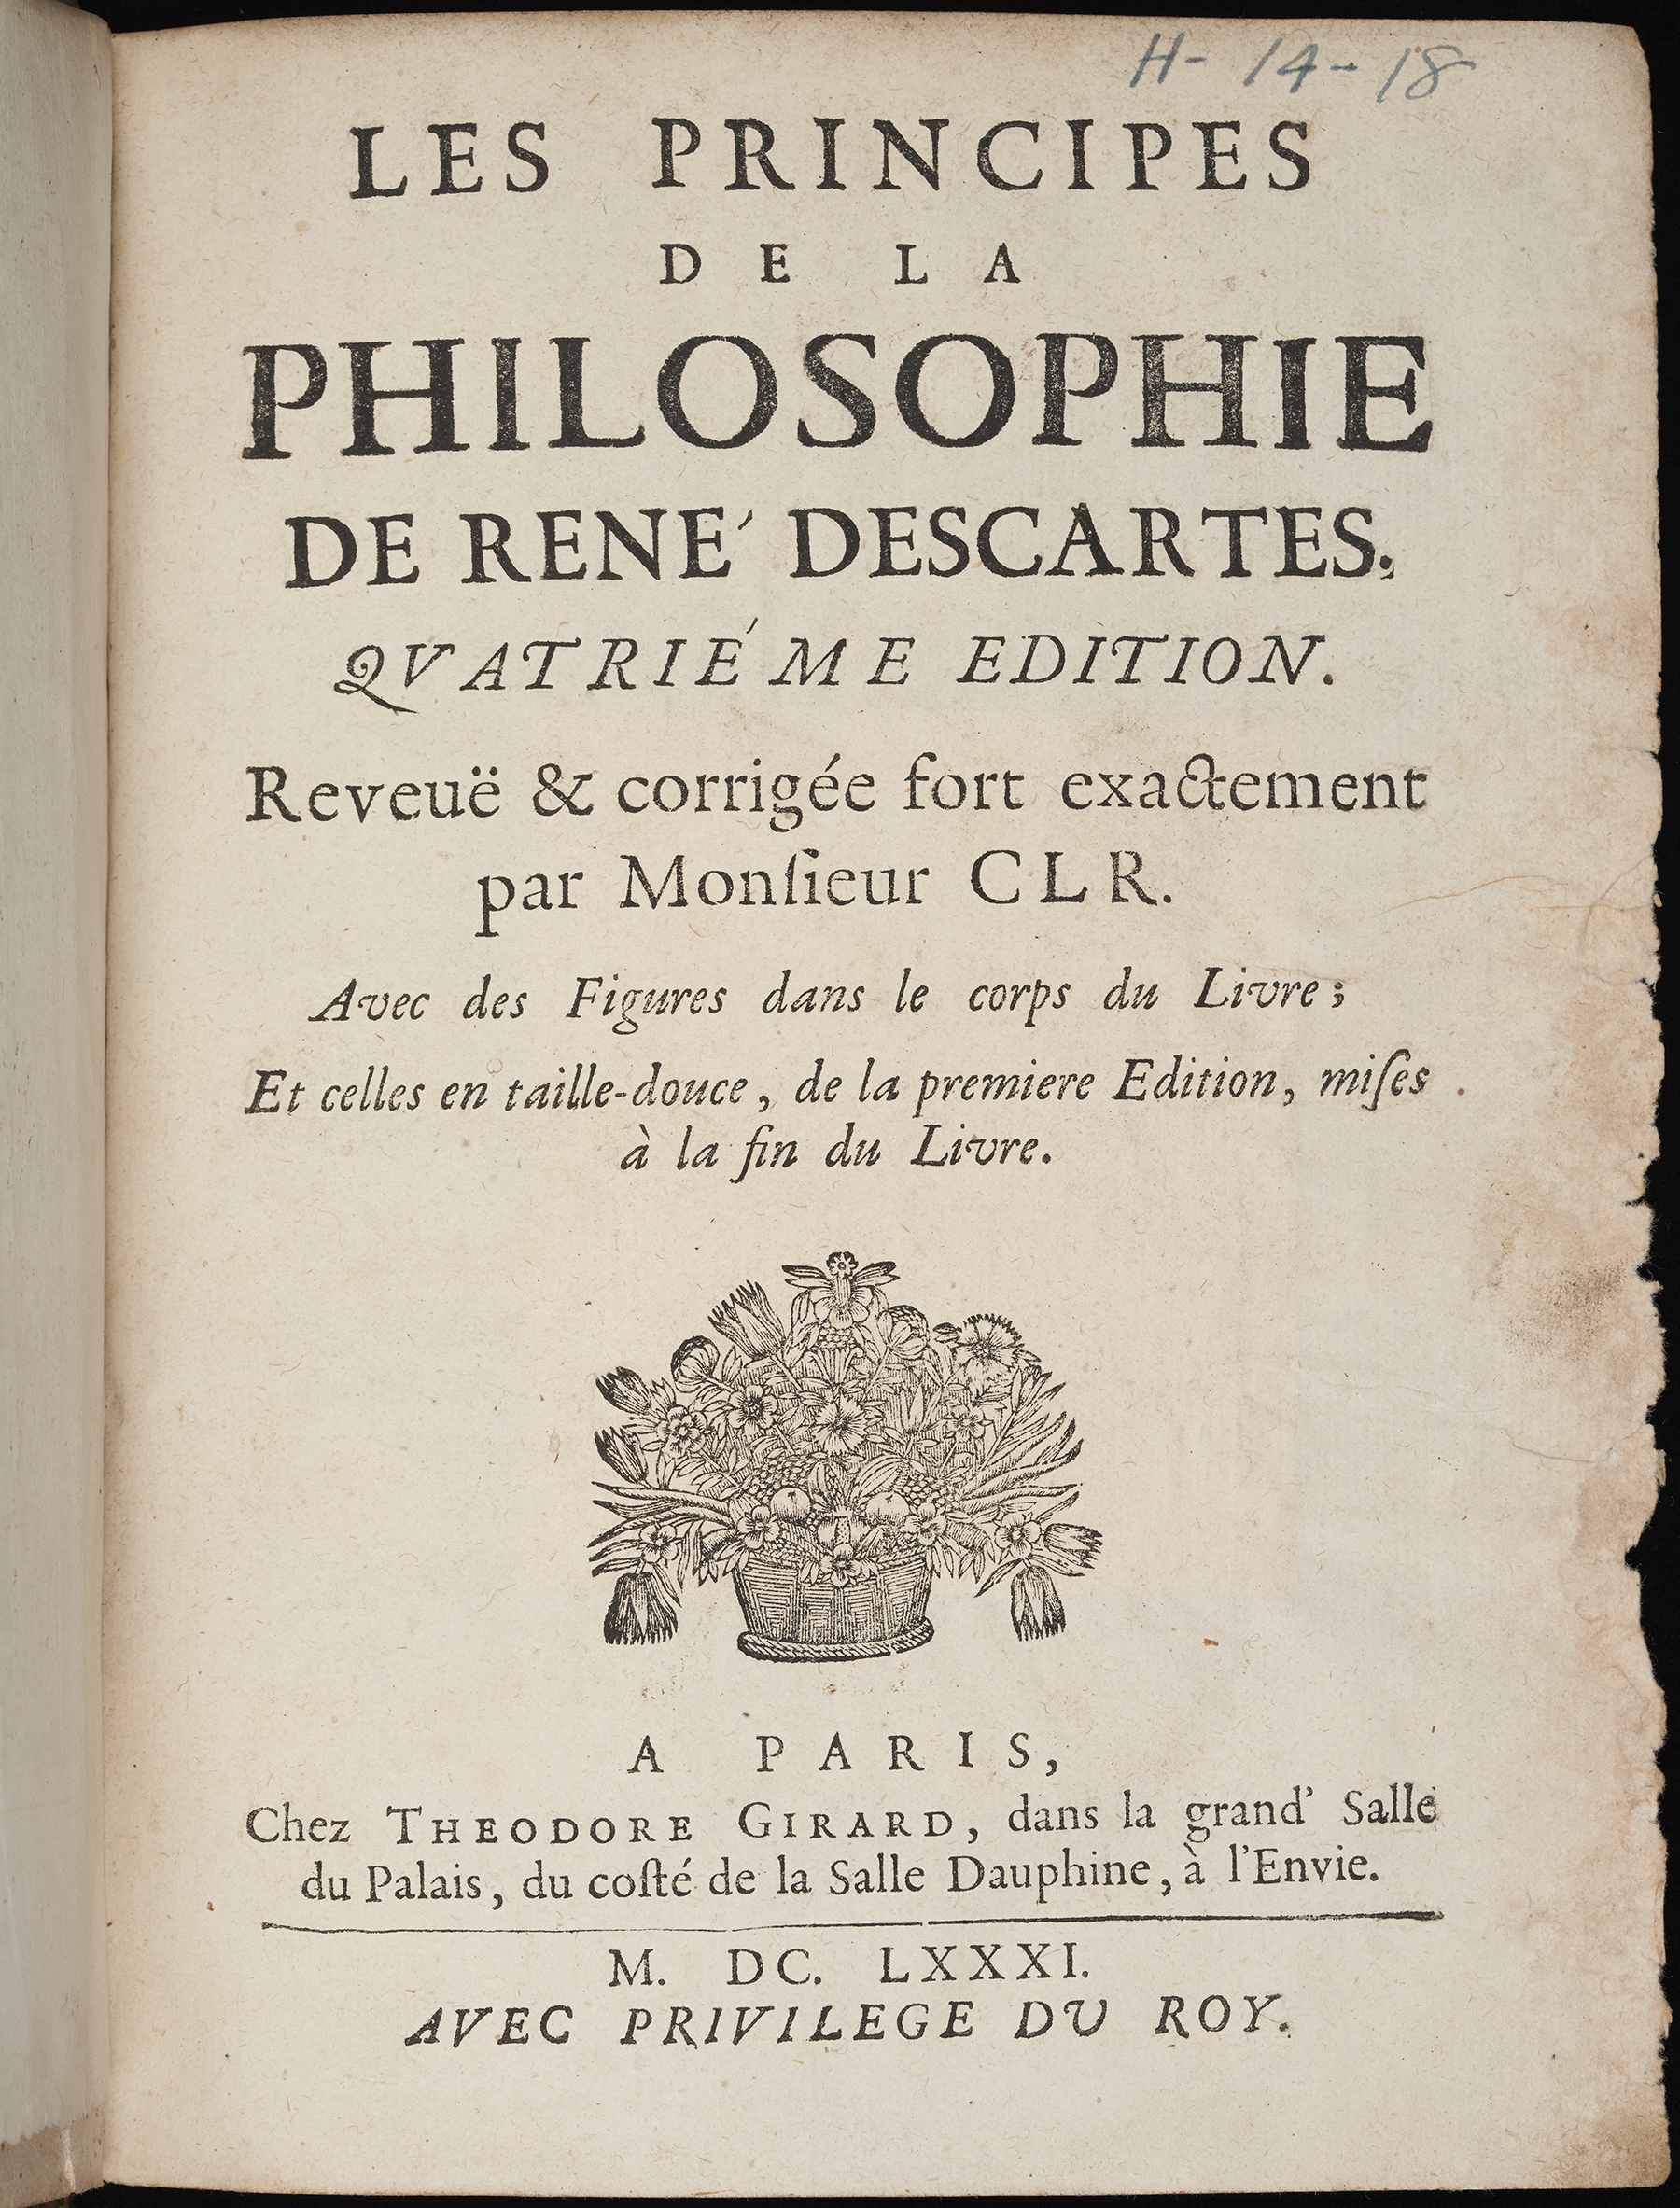 The title page of Old Library H.14.18, 'Les principes de la philosophie' by Descartes, donated to the Old Library by Mary Astell.